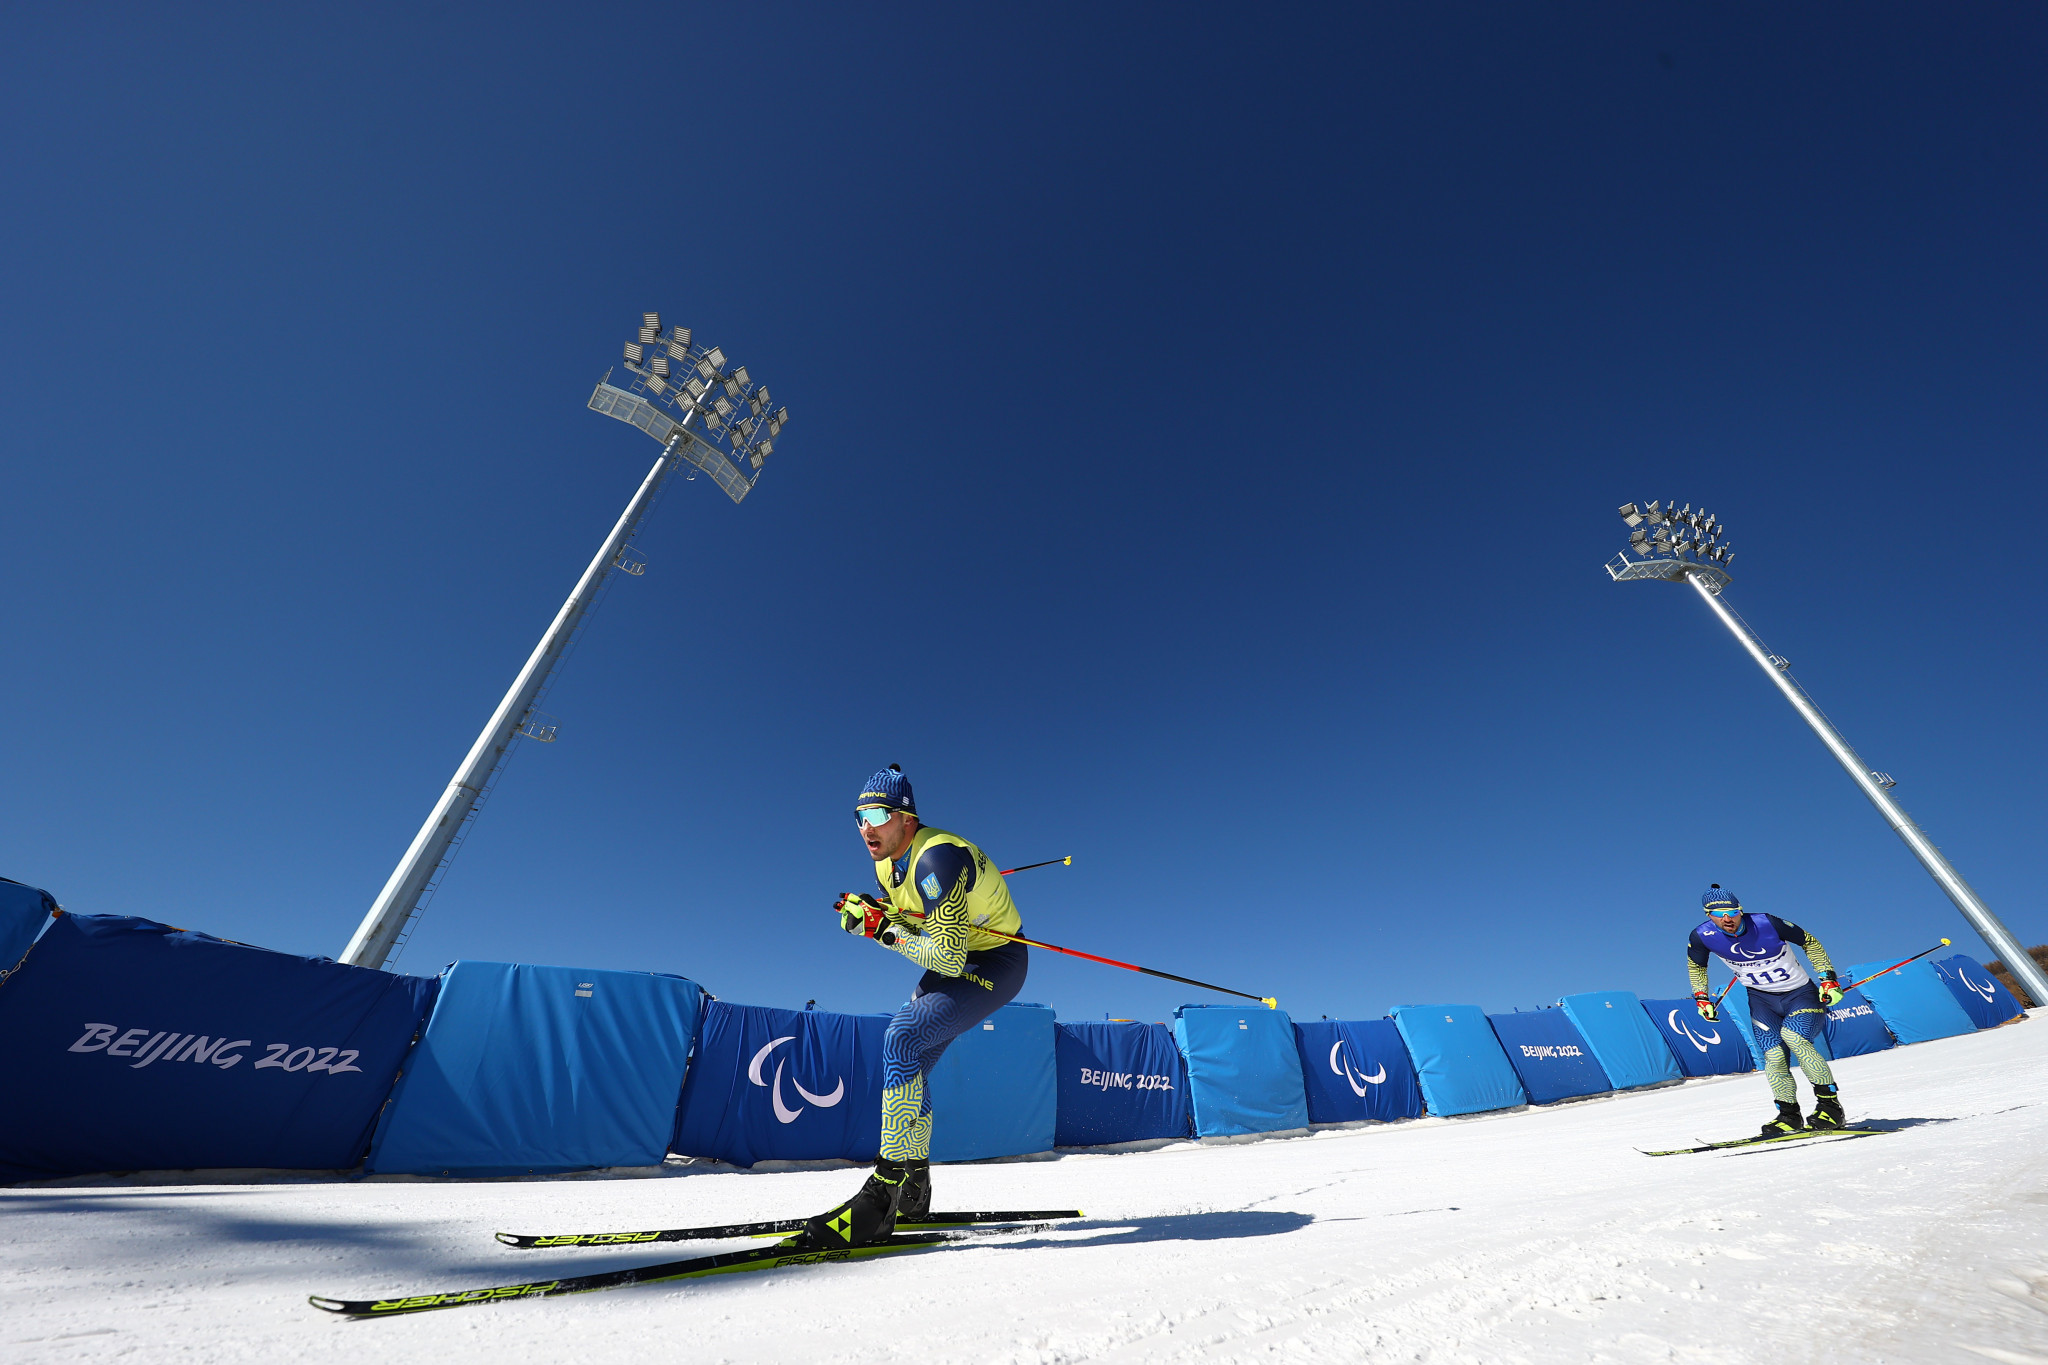 Ukraine enjoyed a strong day in the biathlon competition, winning medals in five out of the six disciplines ©Getty Images